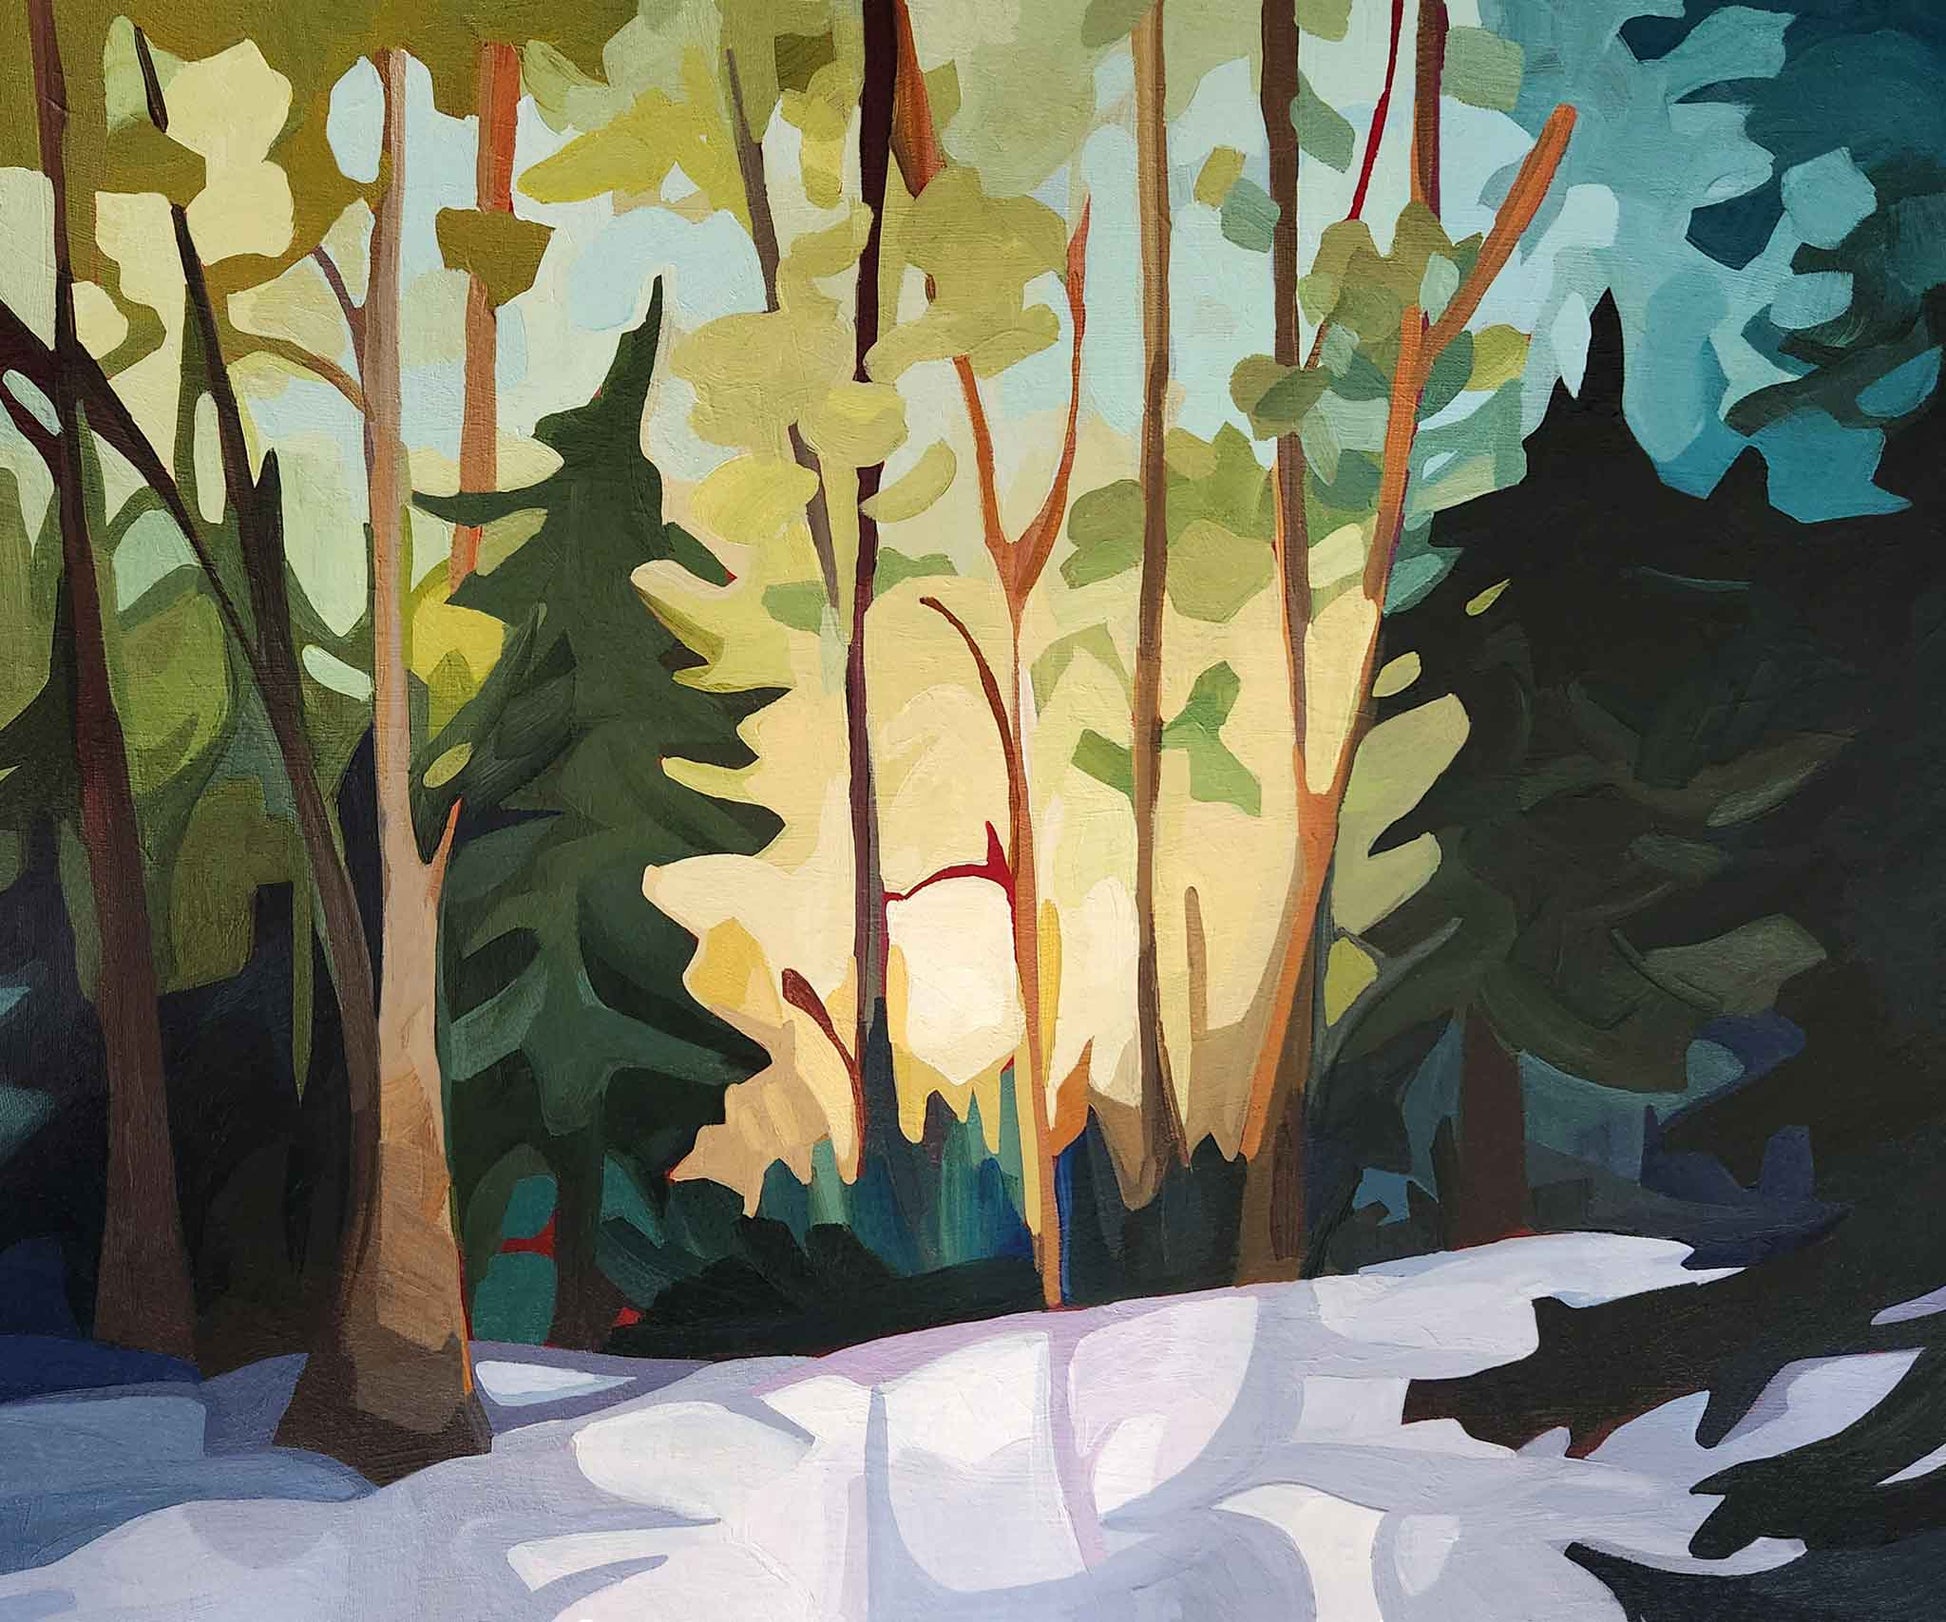 An abstract landscape painting that captures the peacefulness and energy of a winter forest with golden sunlight